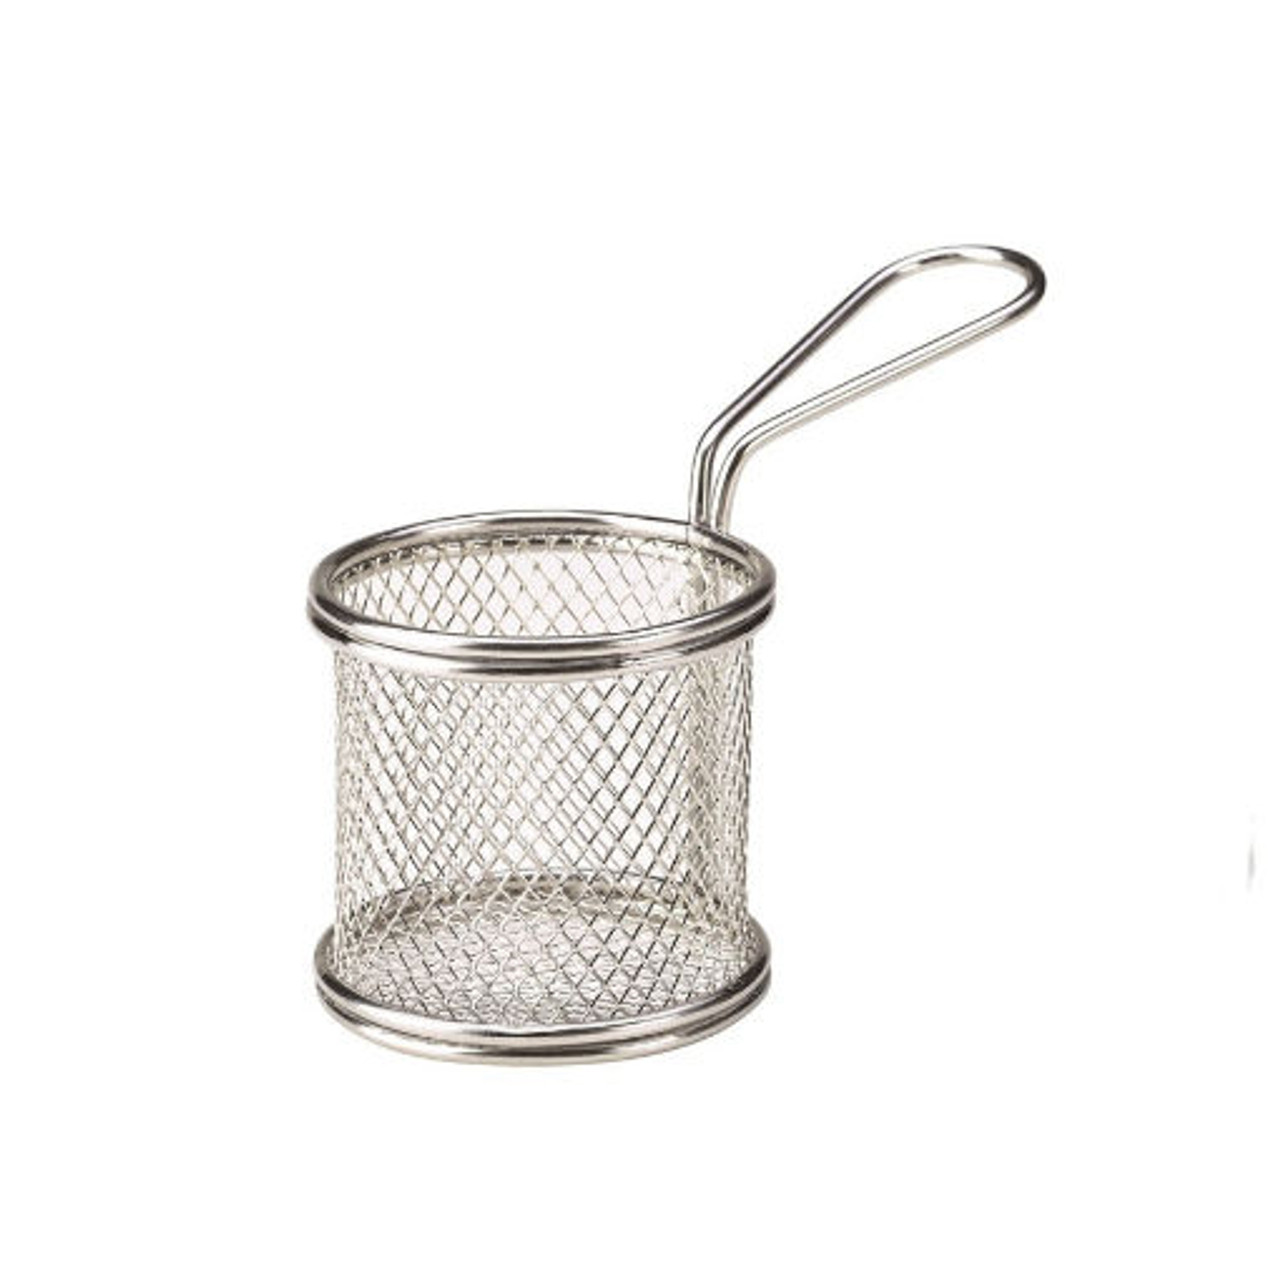 Serving Fry Stainless Steel Round Basket